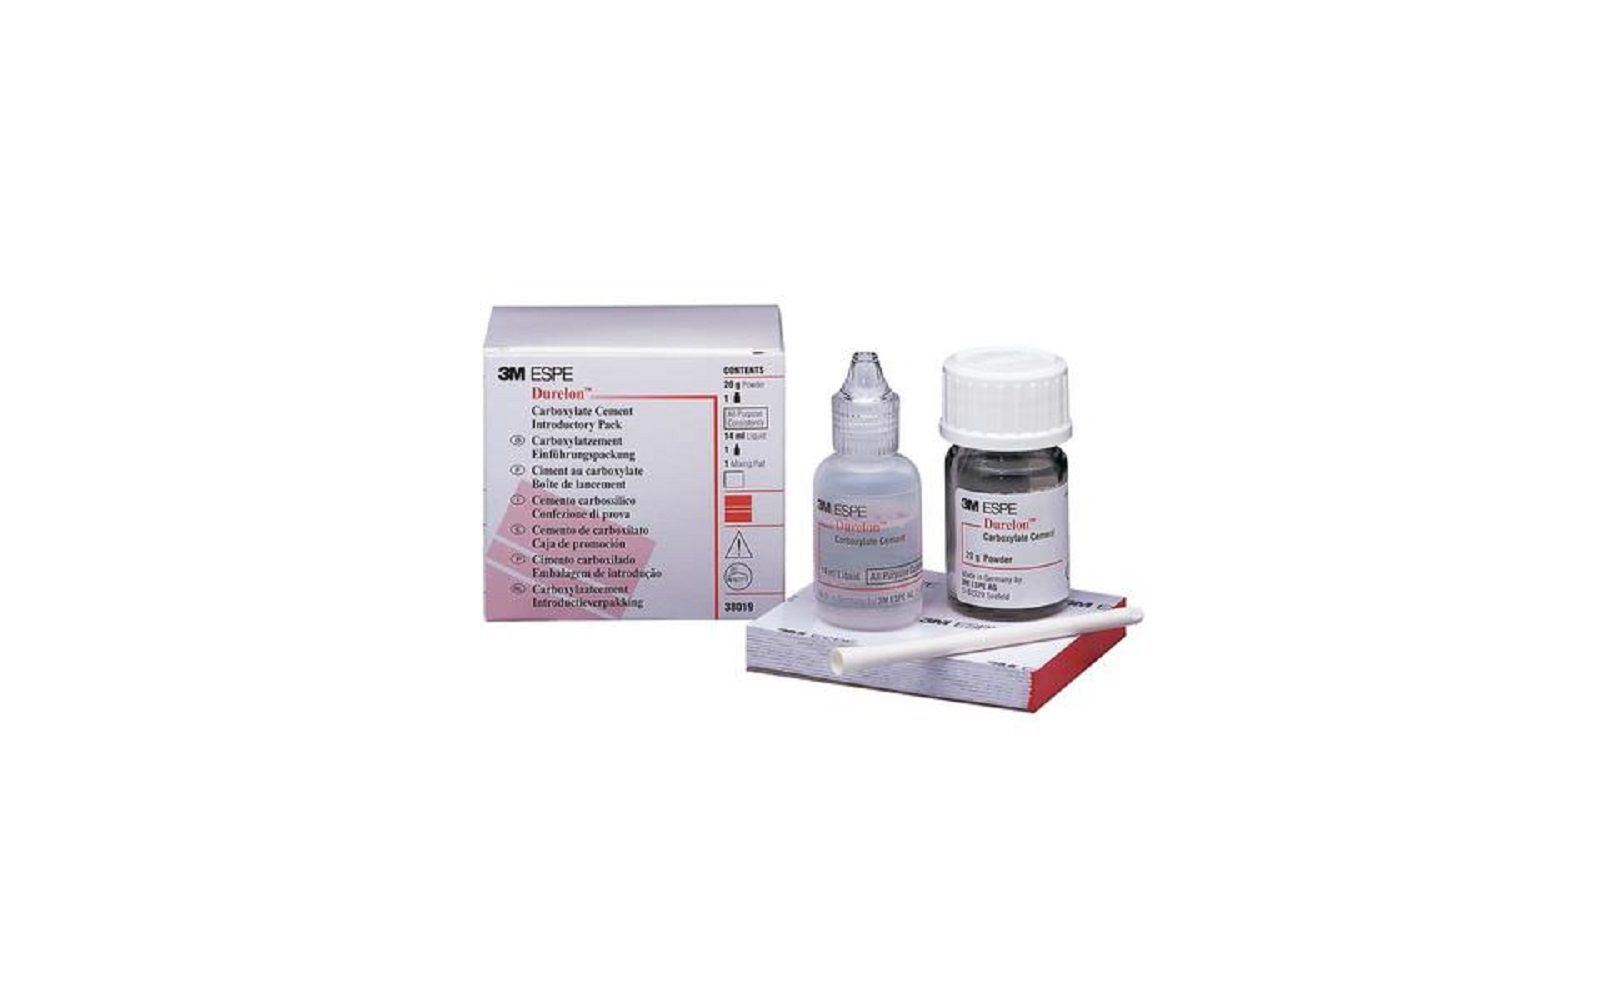 Durelon™ carboxylate luting cement introductory kit